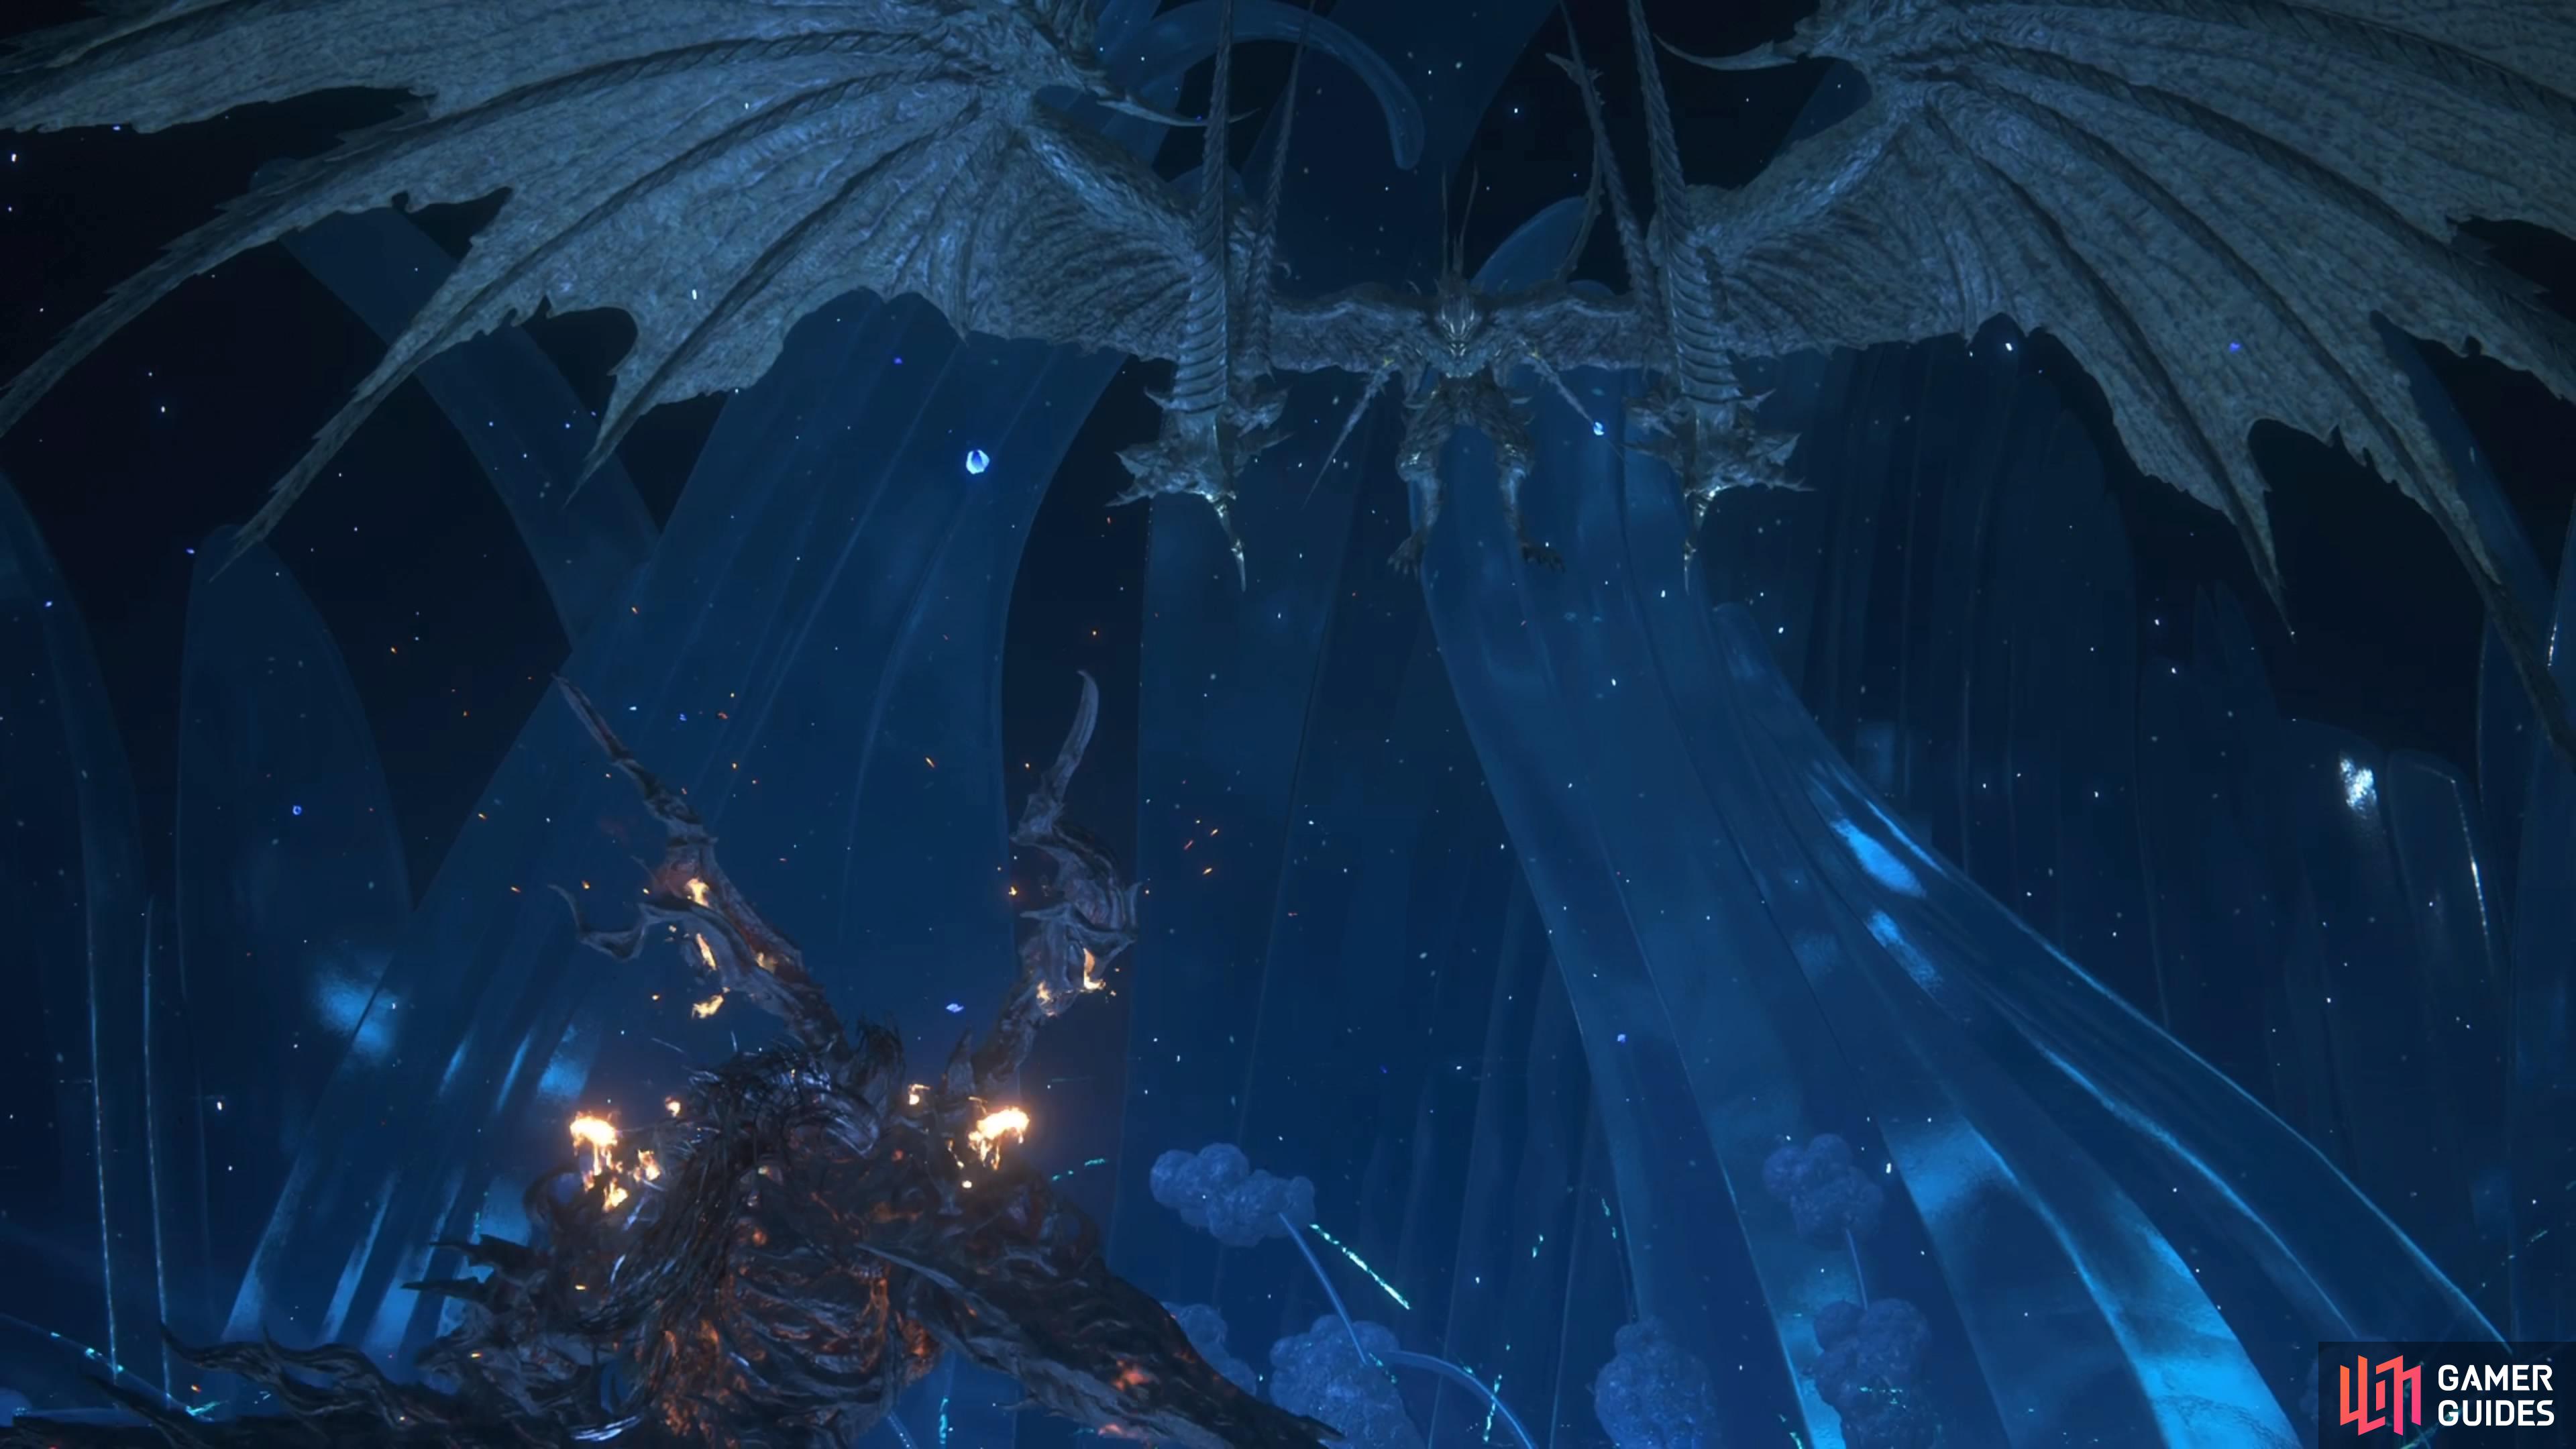 !Bahamut will be another battle against an Eikon, so you know it will be a spectacle!